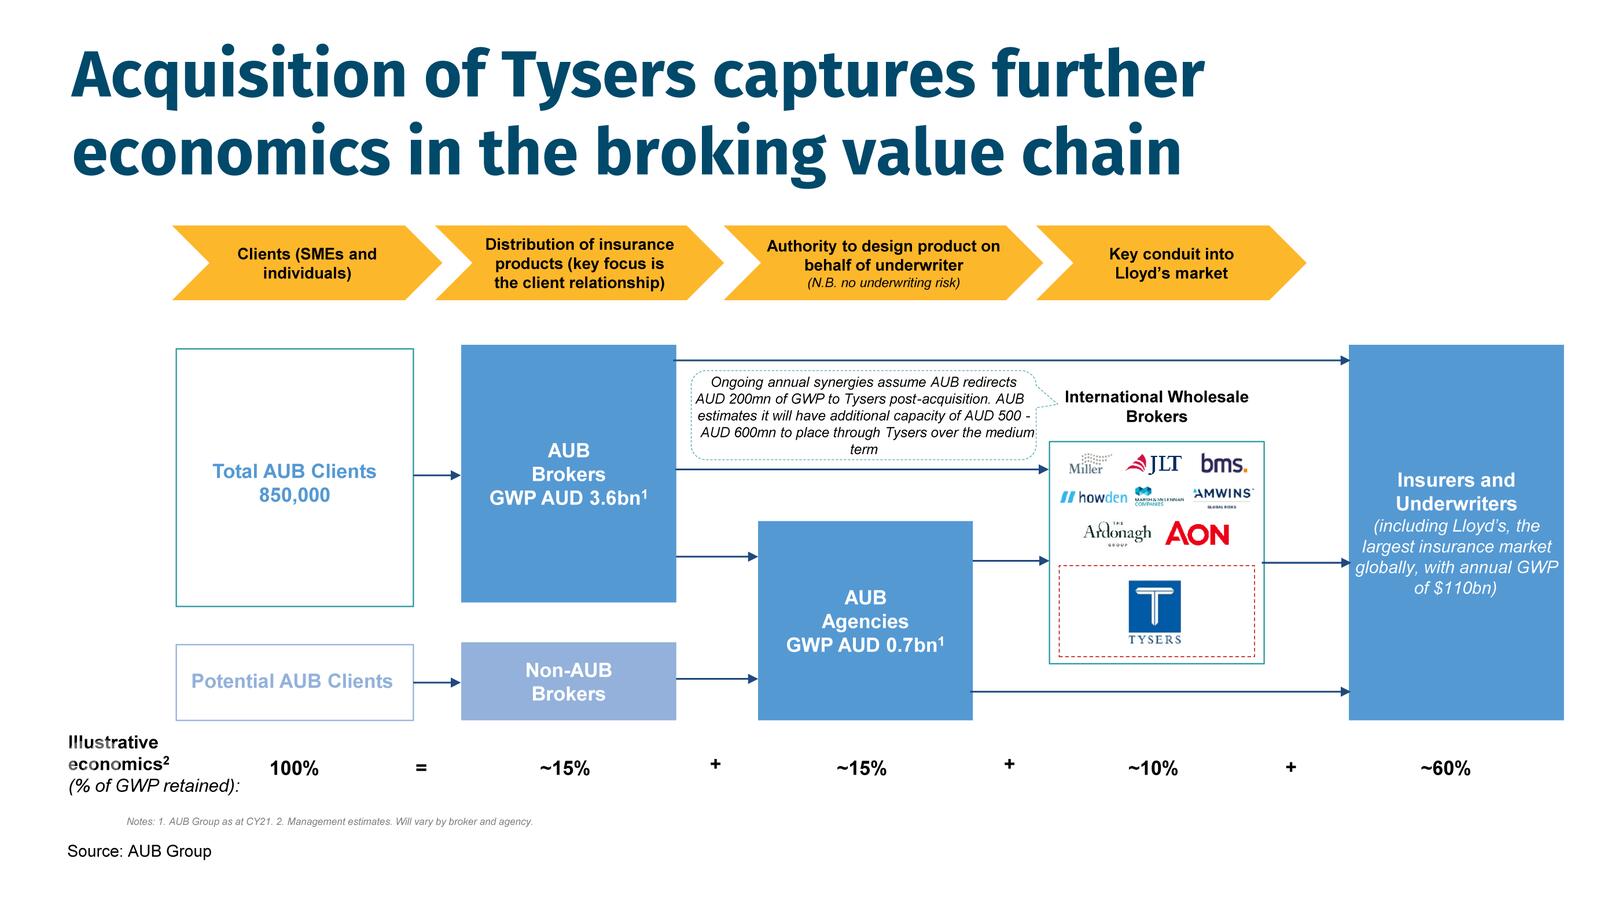 Acquisition of Tysers captures further economics in the broking value chain